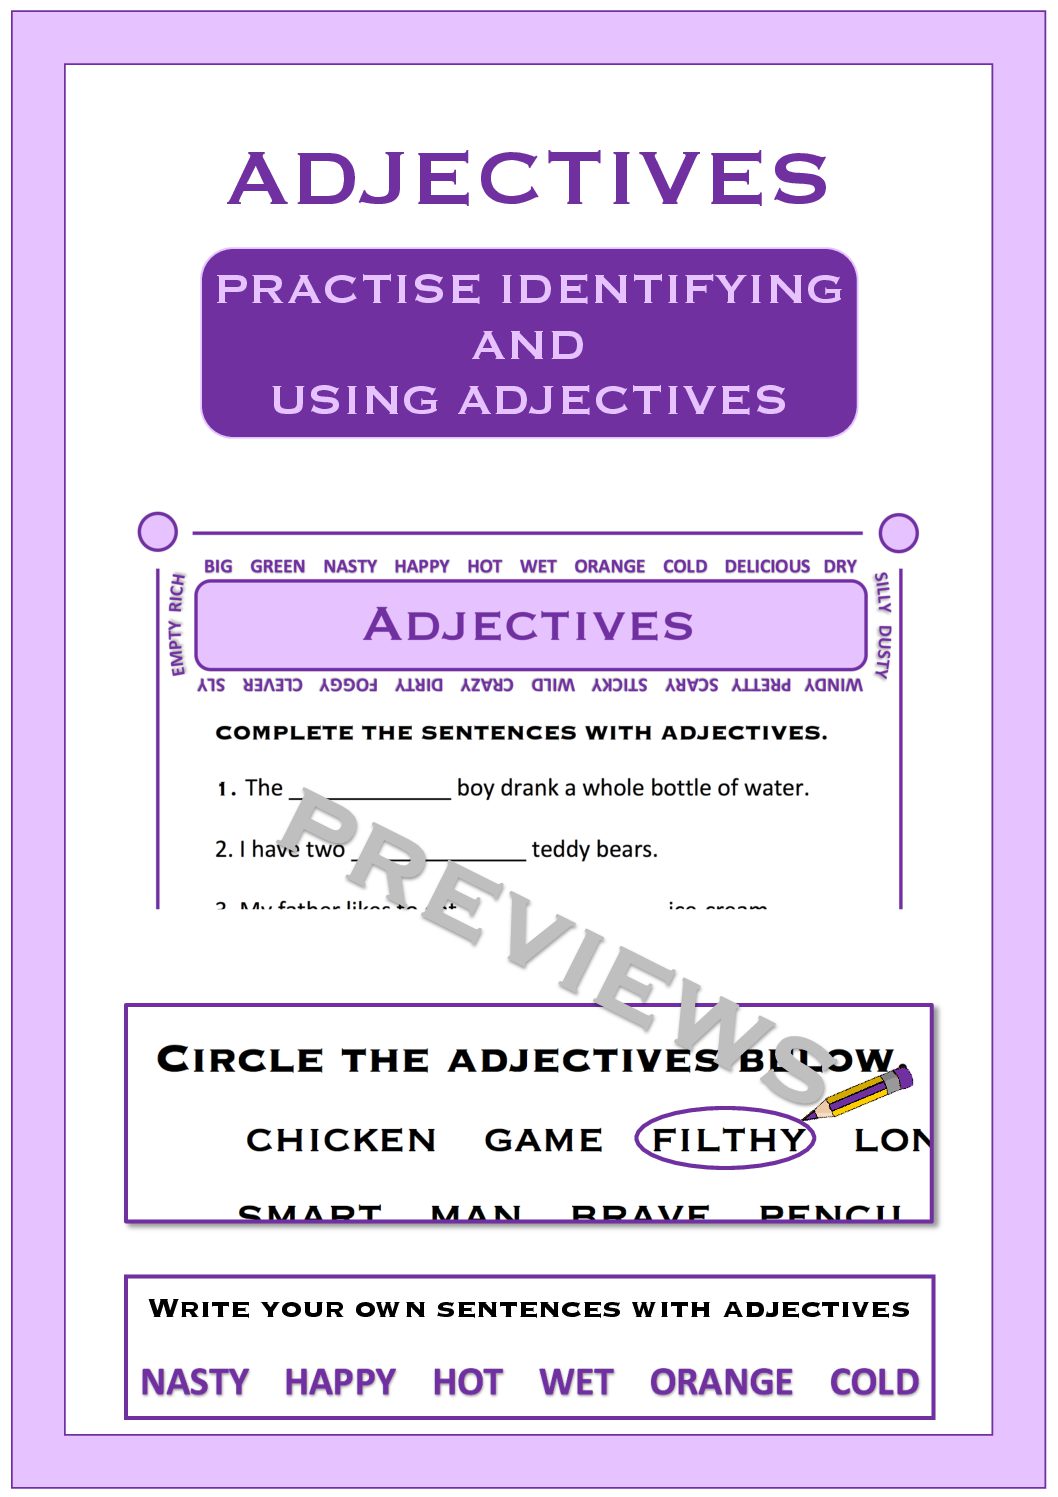 ADJECTIVES COVER